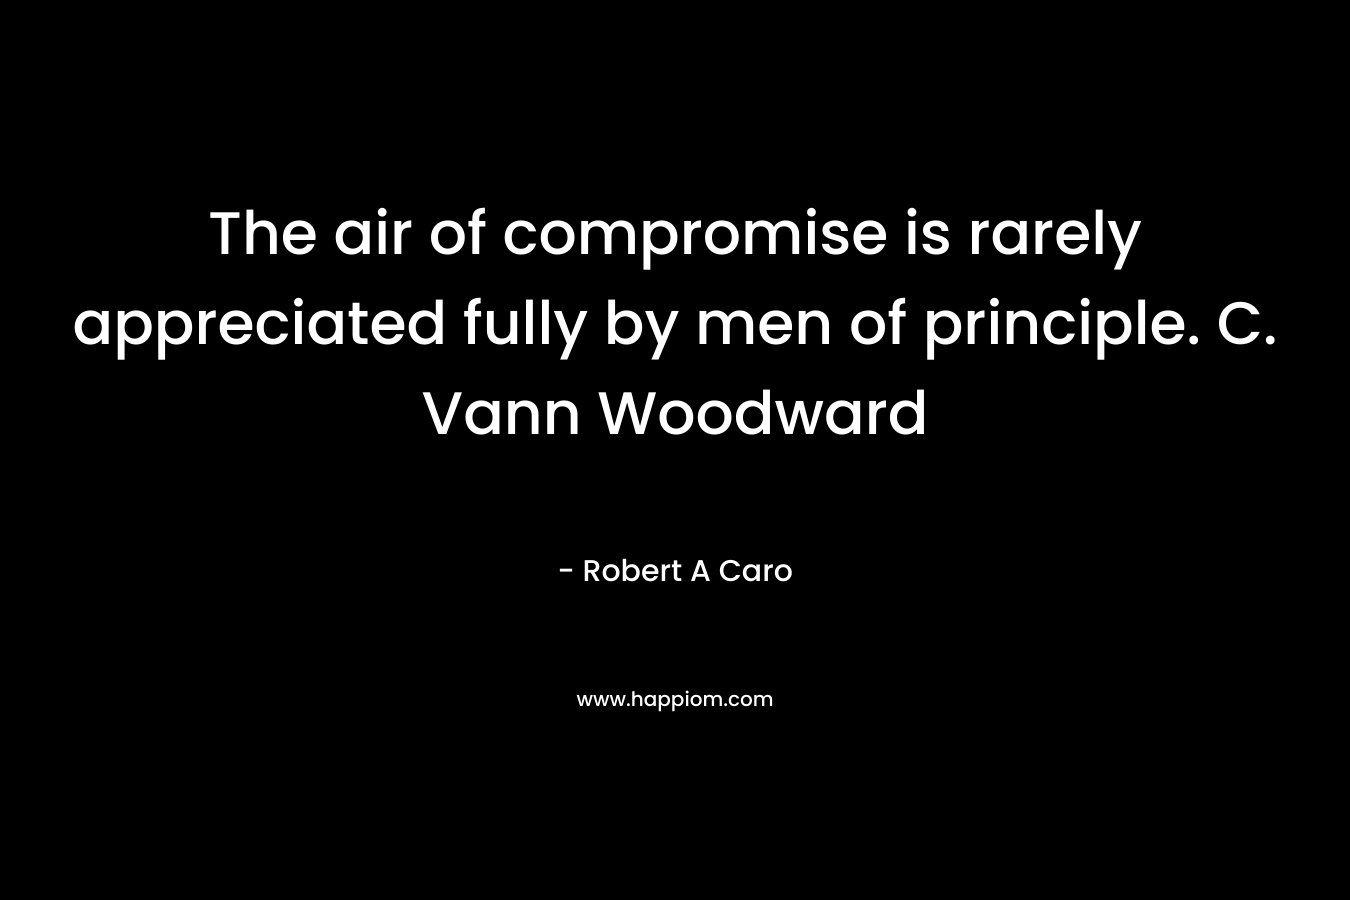 The air of compromise is rarely appreciated fully by men of principle. C. Vann Woodward – Robert A Caro